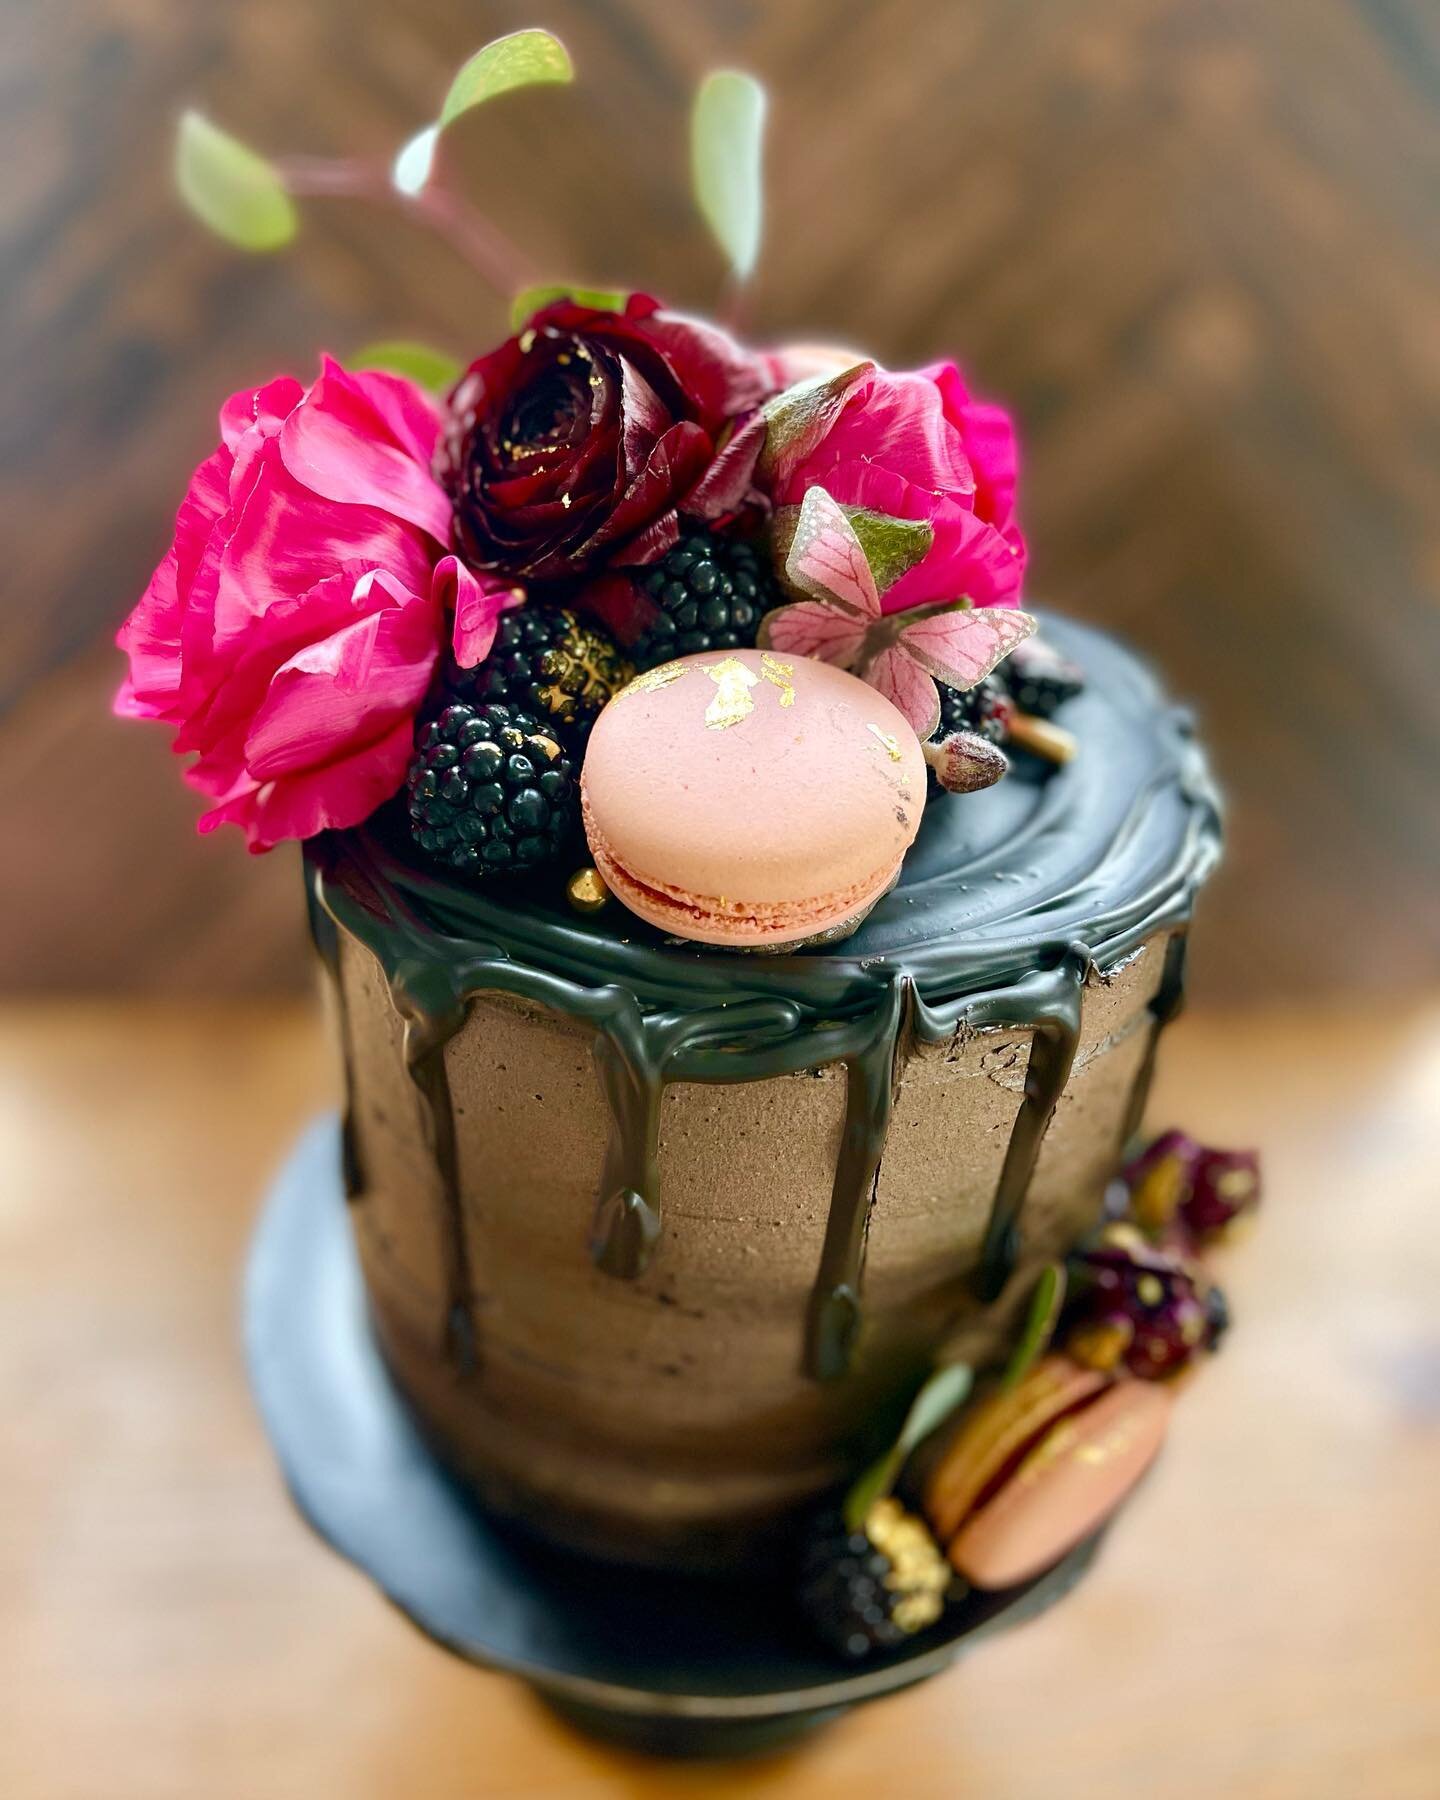 Last month I had a birthday so naturally I had to make myself a cake. I'm not usually a big chocolate fan but since I knew I'd be sharing (and doing a little axe throwing!) I wanted to make a crowd pleaser. 

This is a Classic Chocolate Cake + Homema